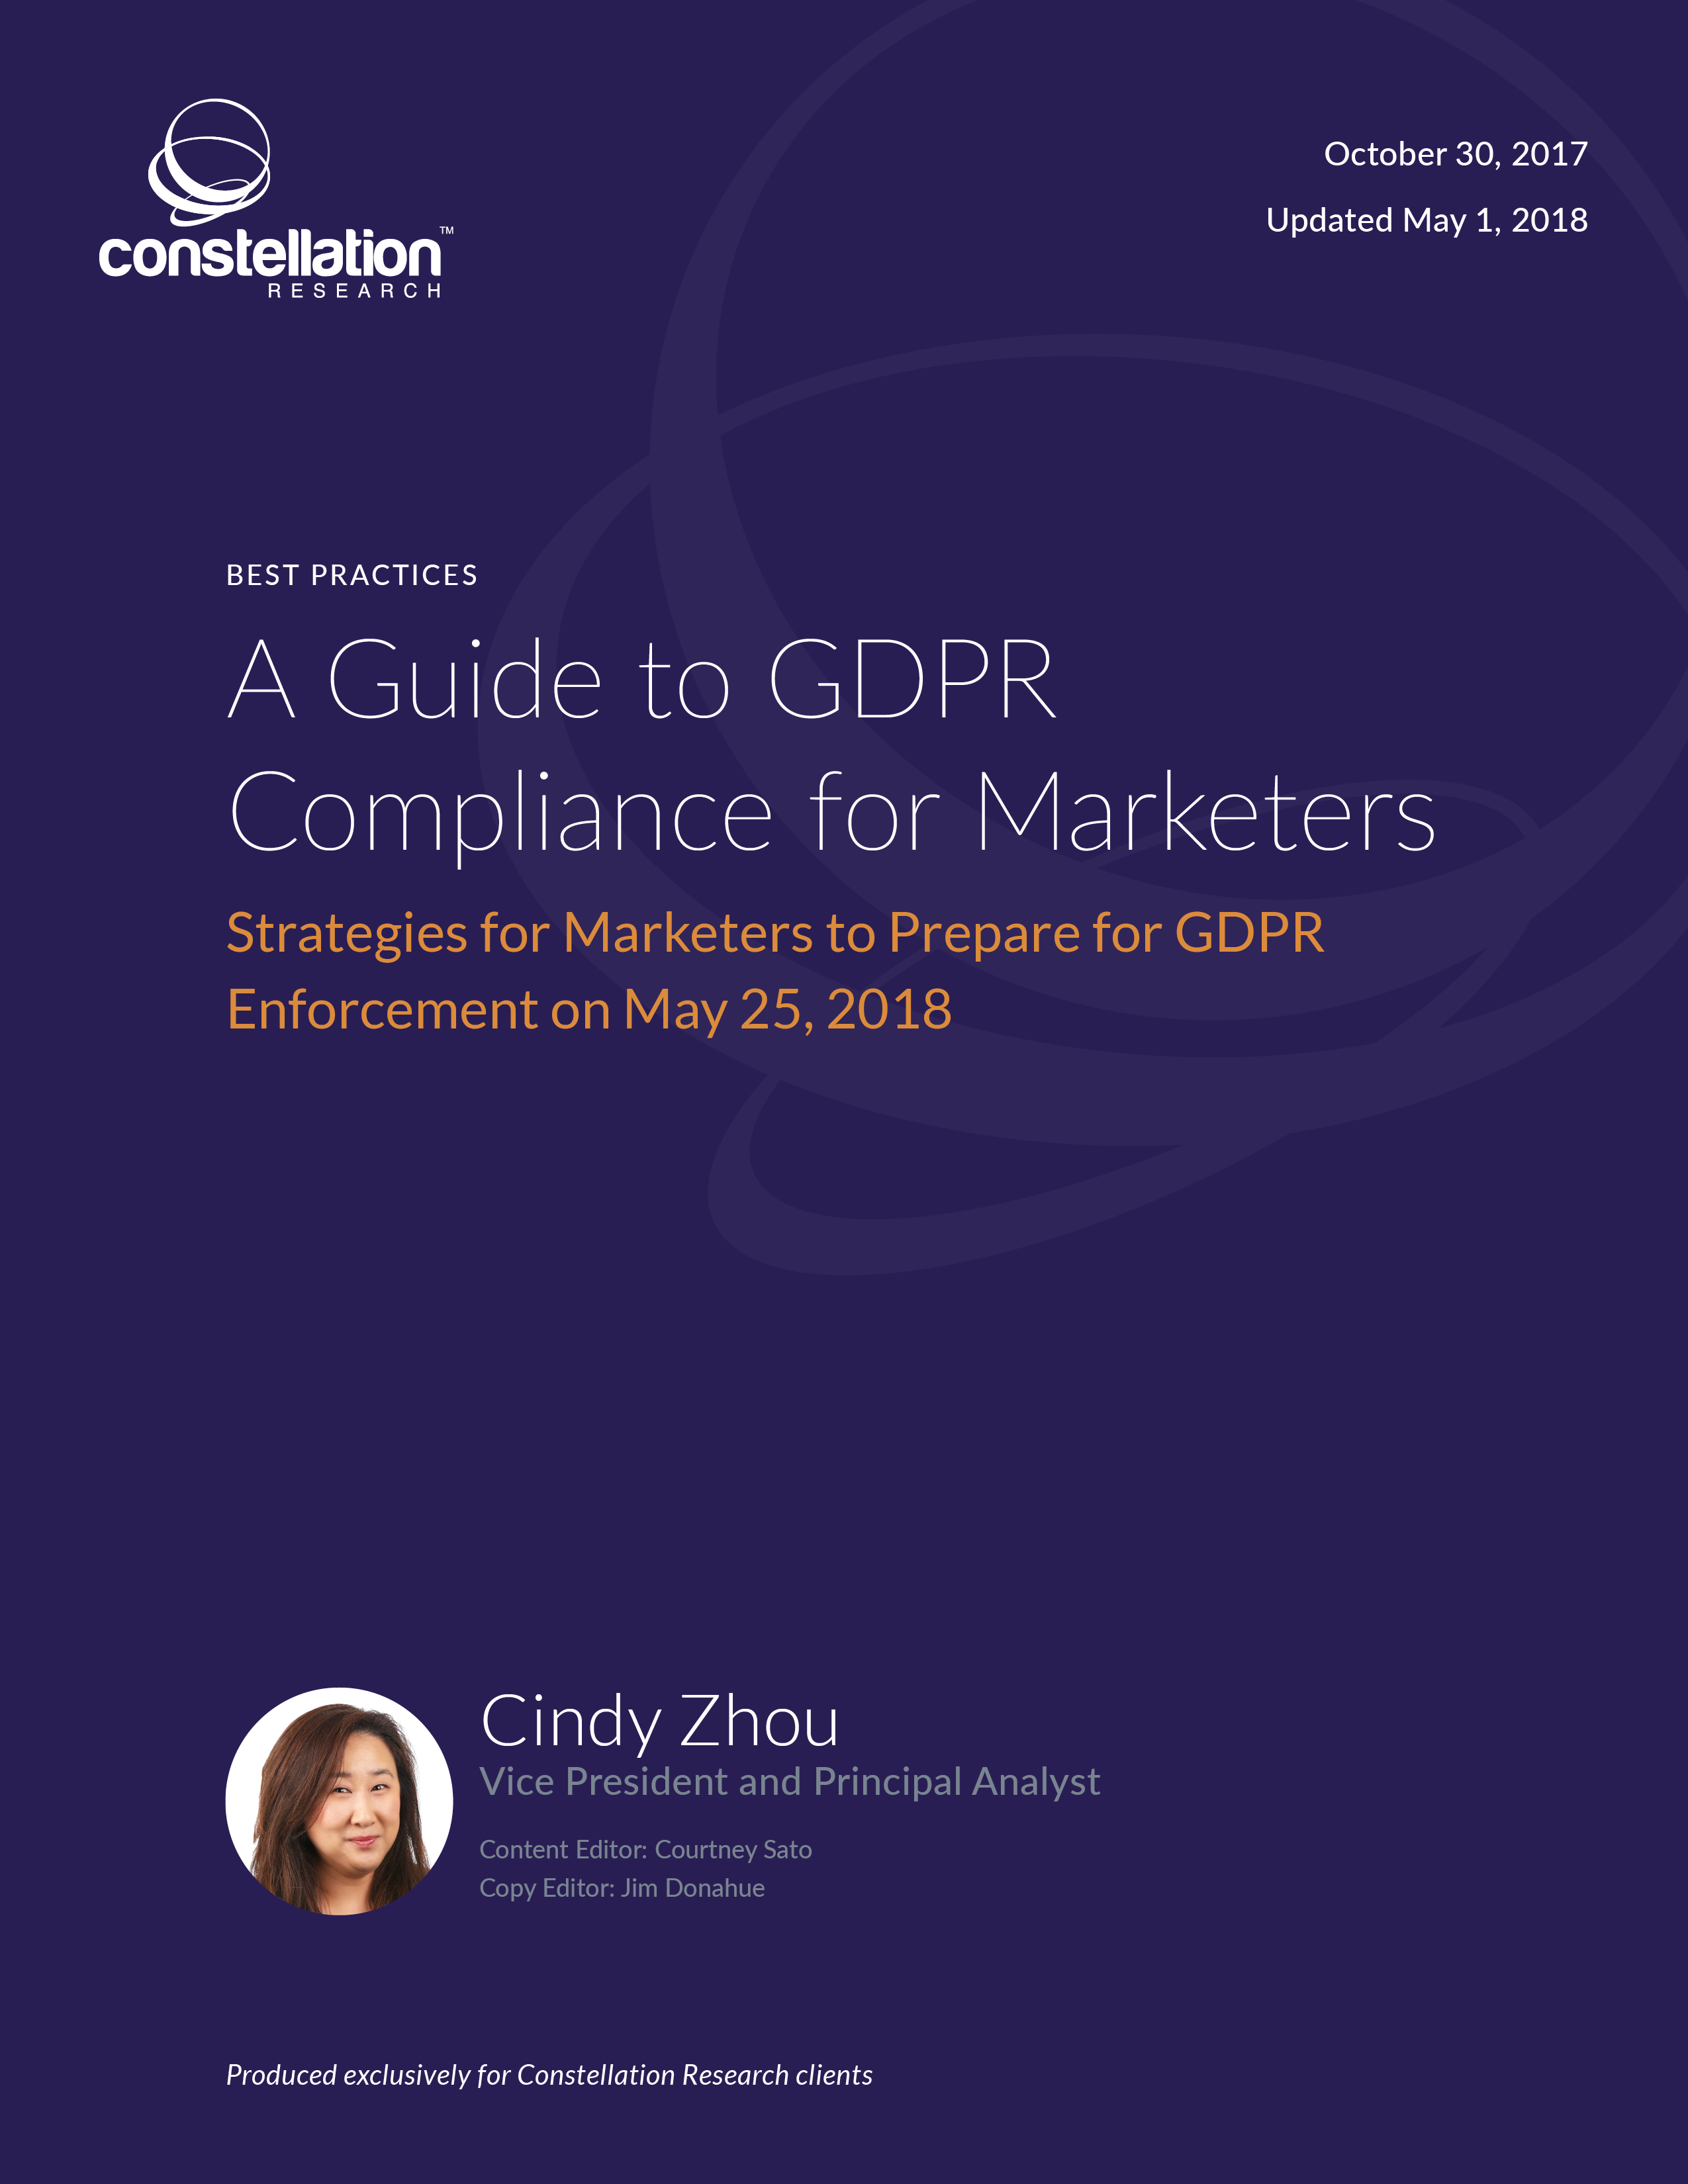 A Guide to GDPR Compliance for Marketers